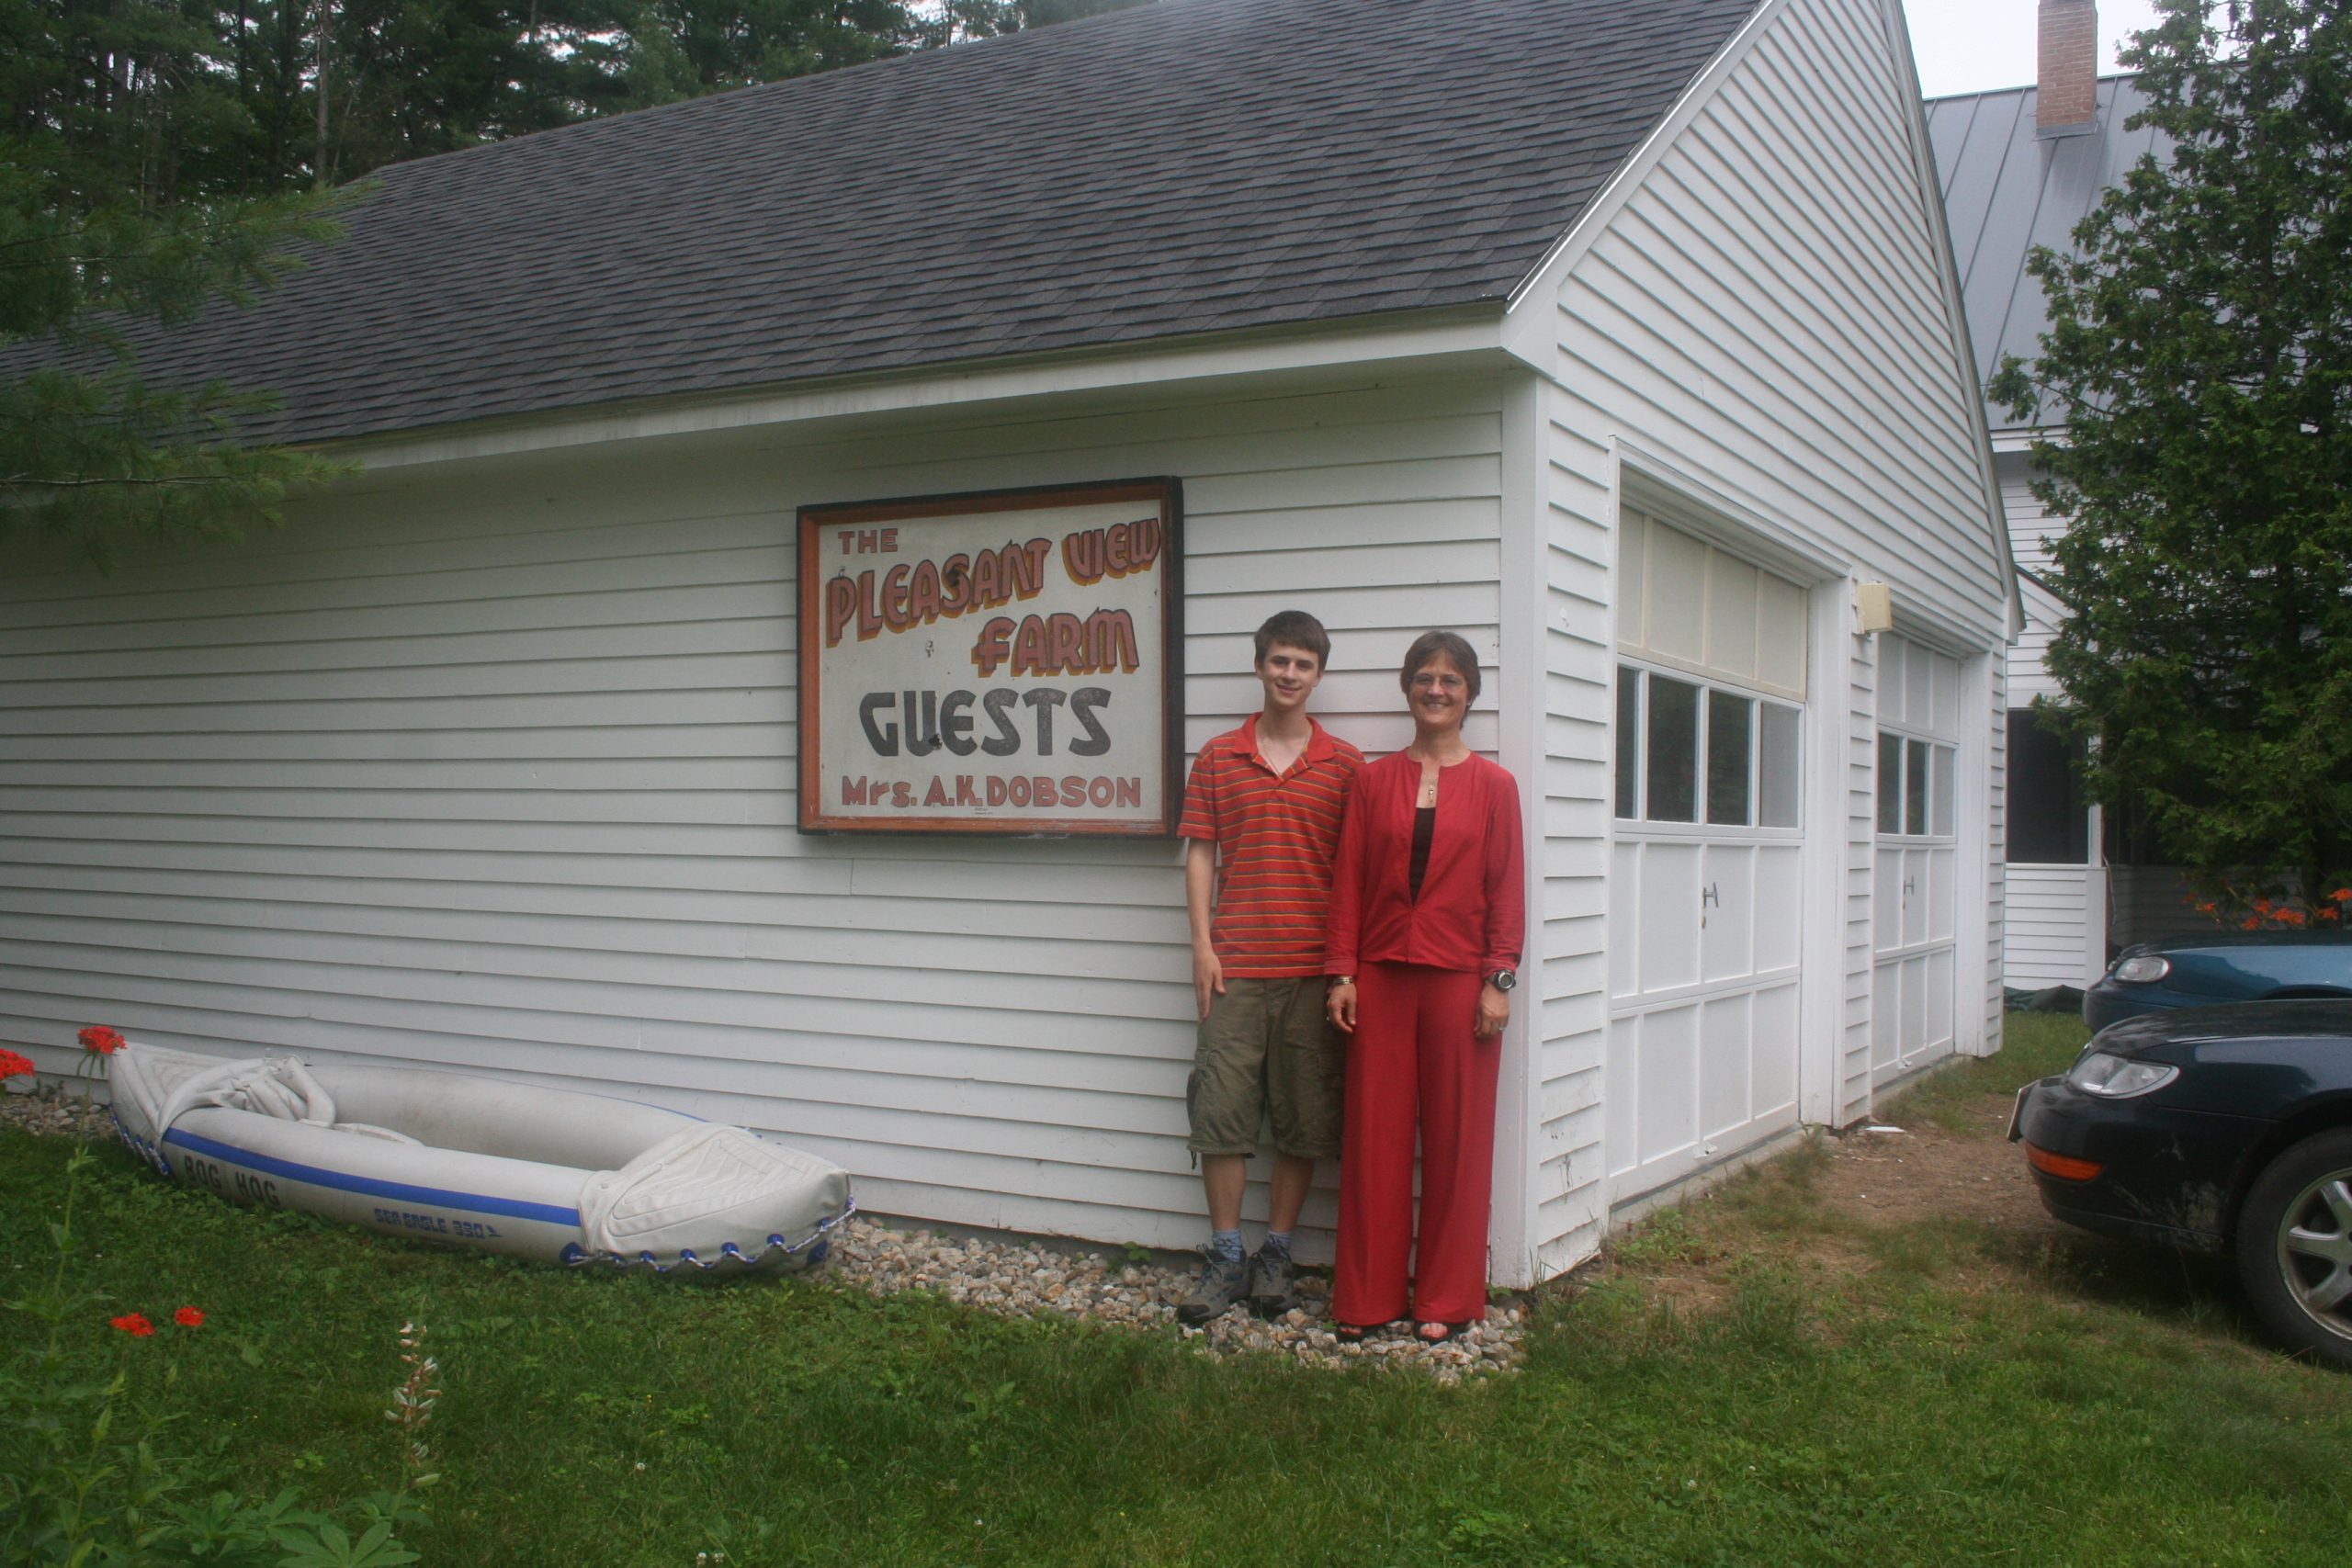 A new Pleasant View building with Sheryl and 3rd generation Hubbard Brook researcher David